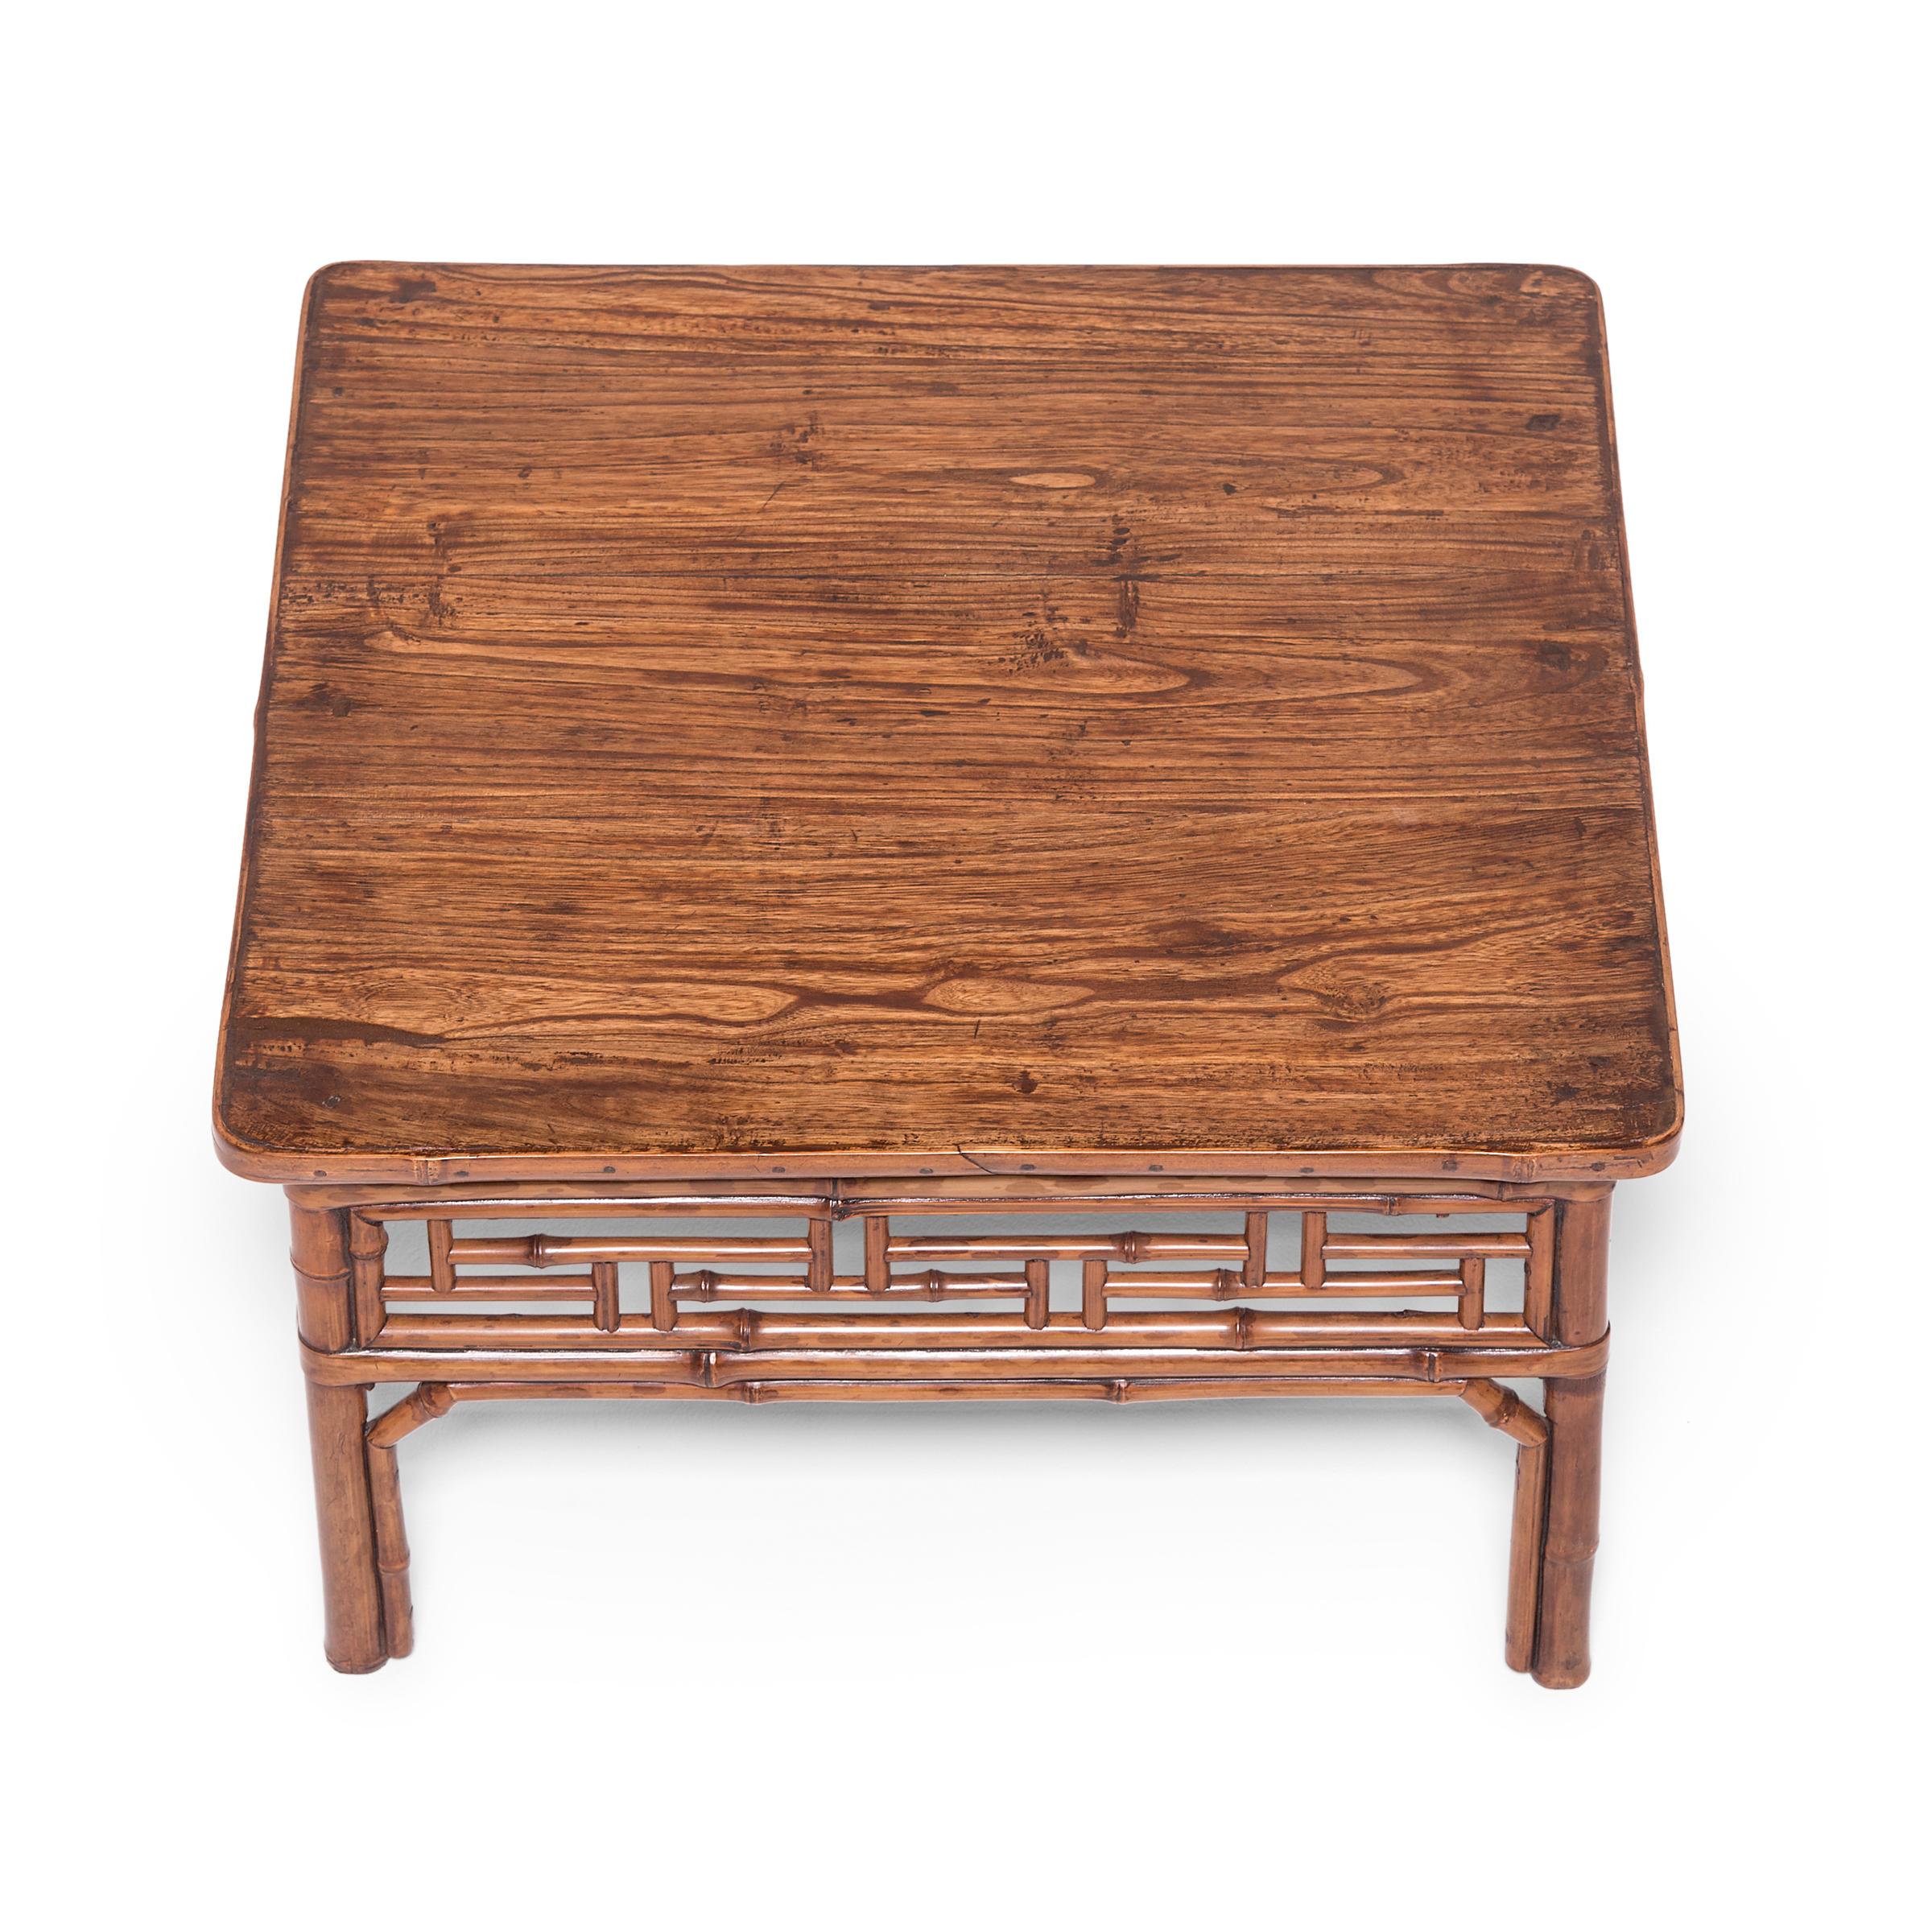 19th Century Chinese Low Bamboo Table 1